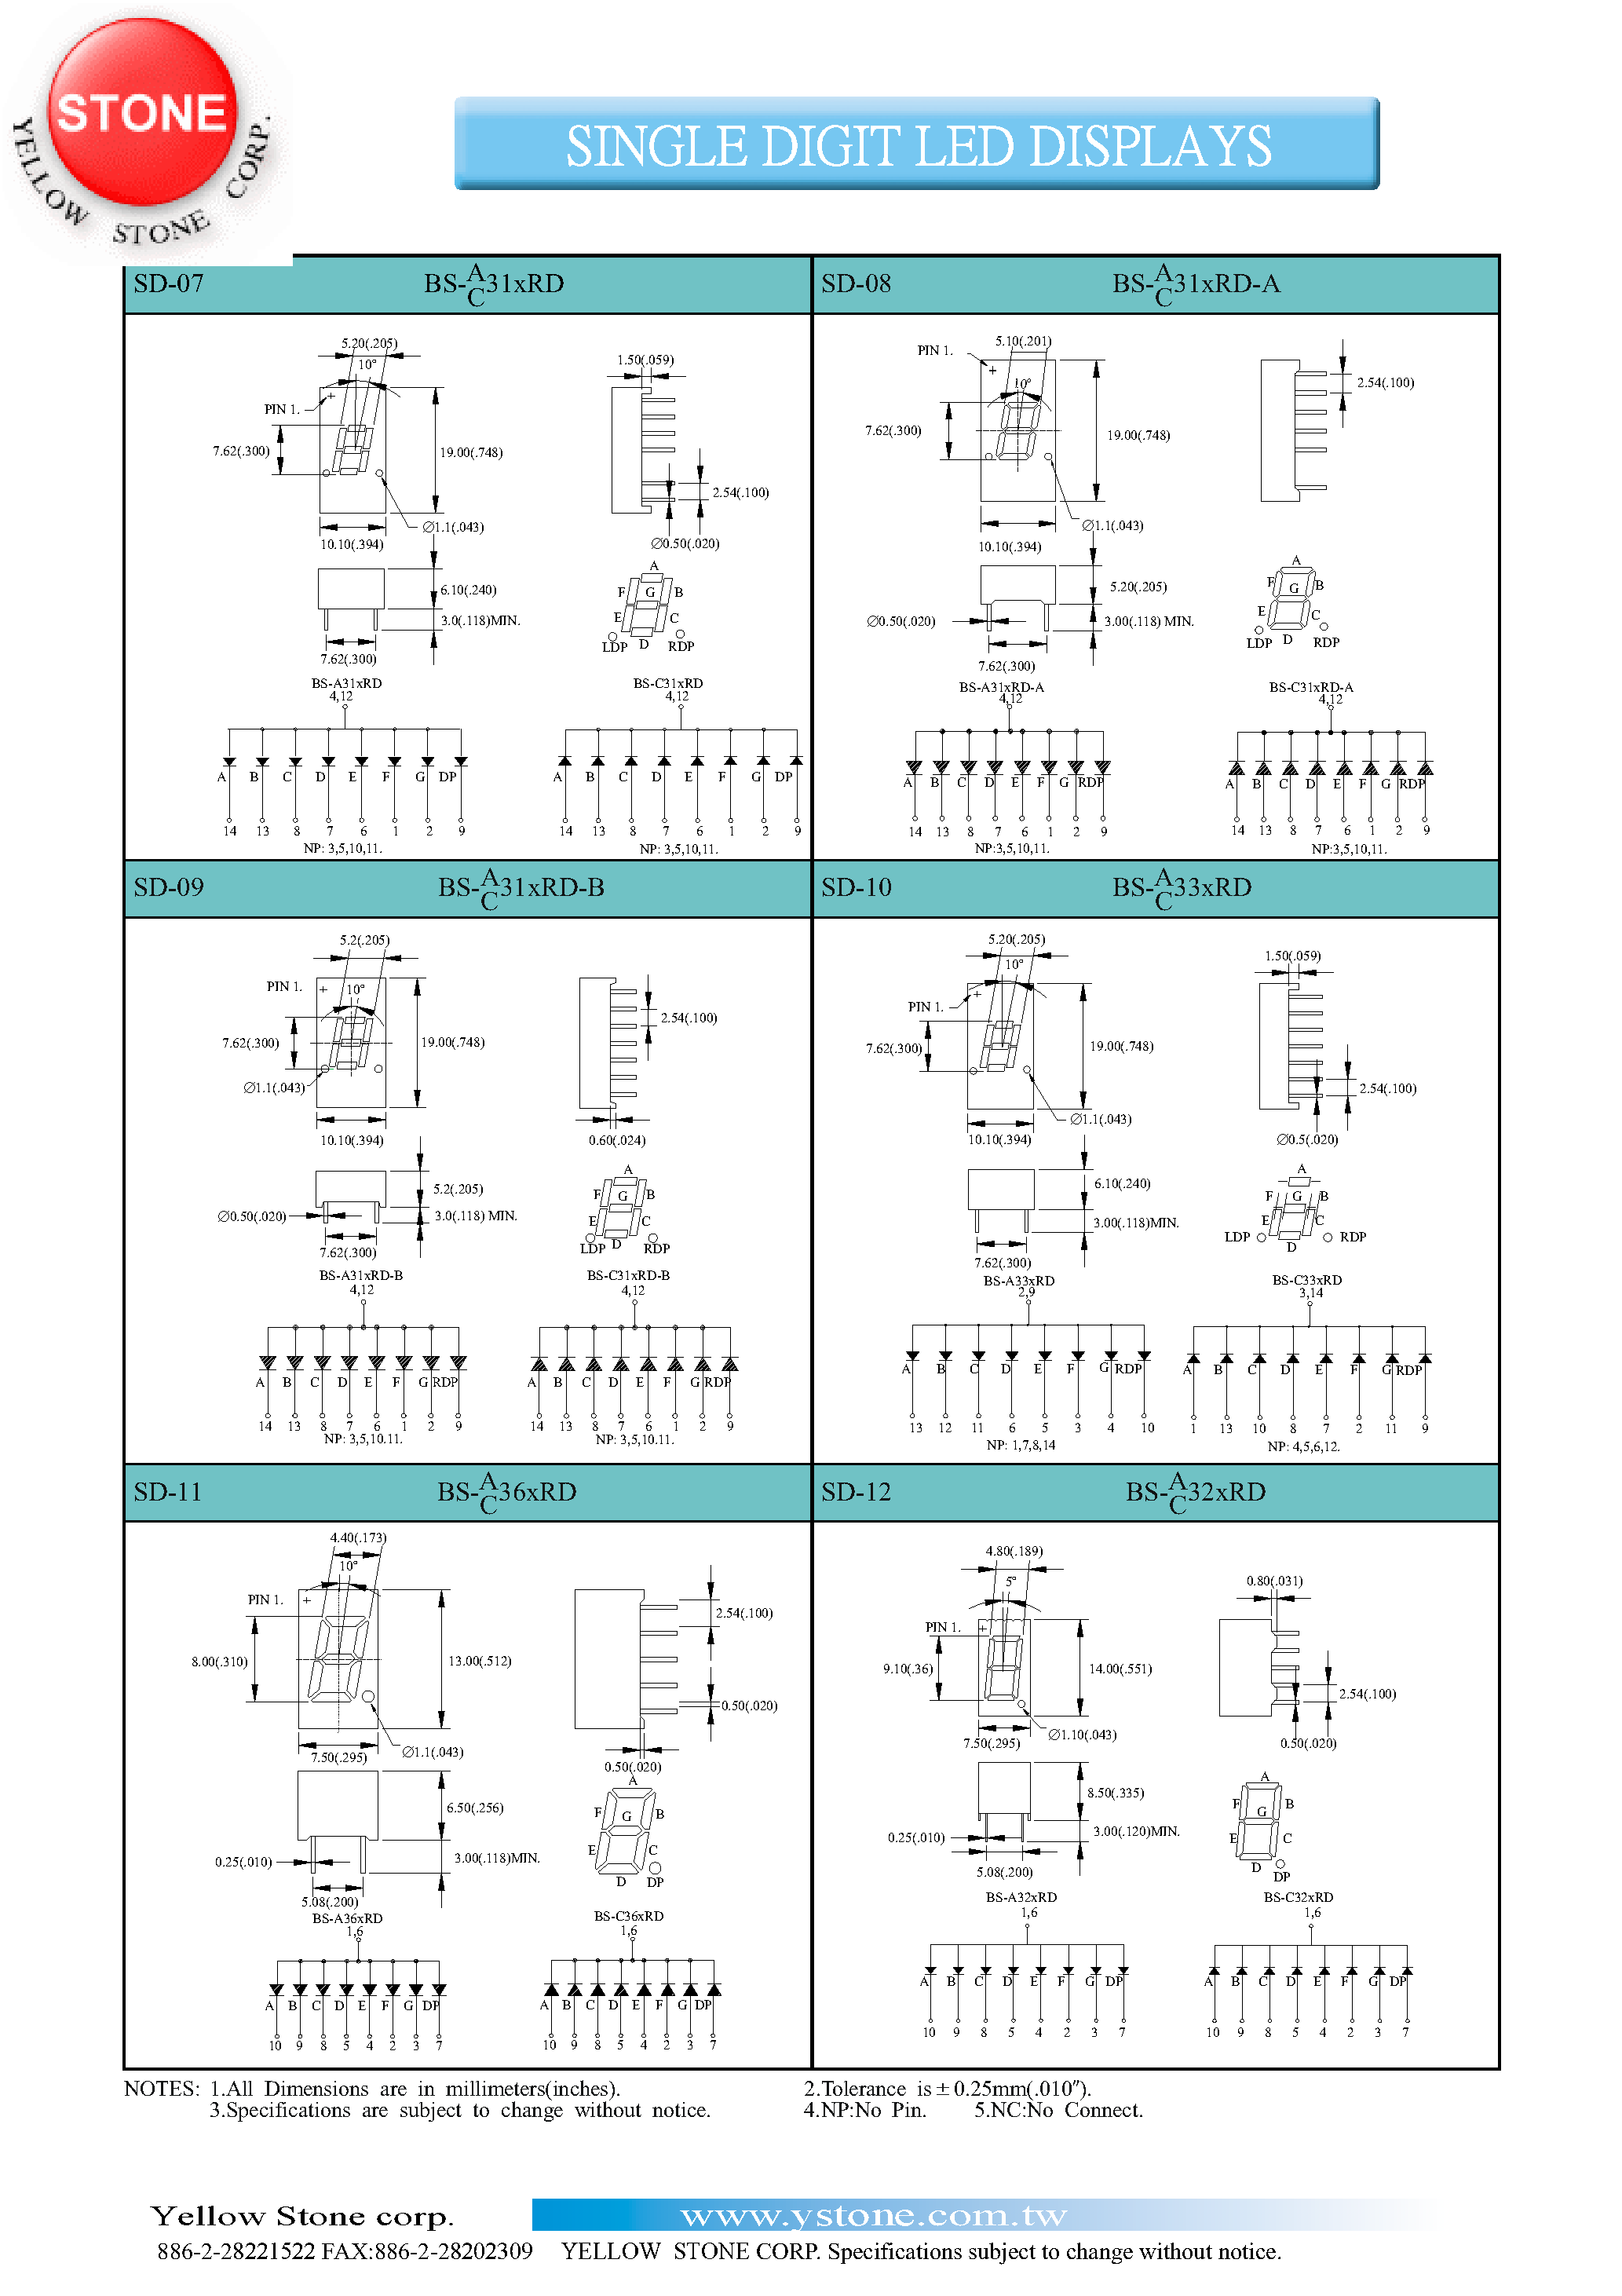 Datasheet BS-A315RD-B - SINGLE DIGIT LED DISPLAYS page 2